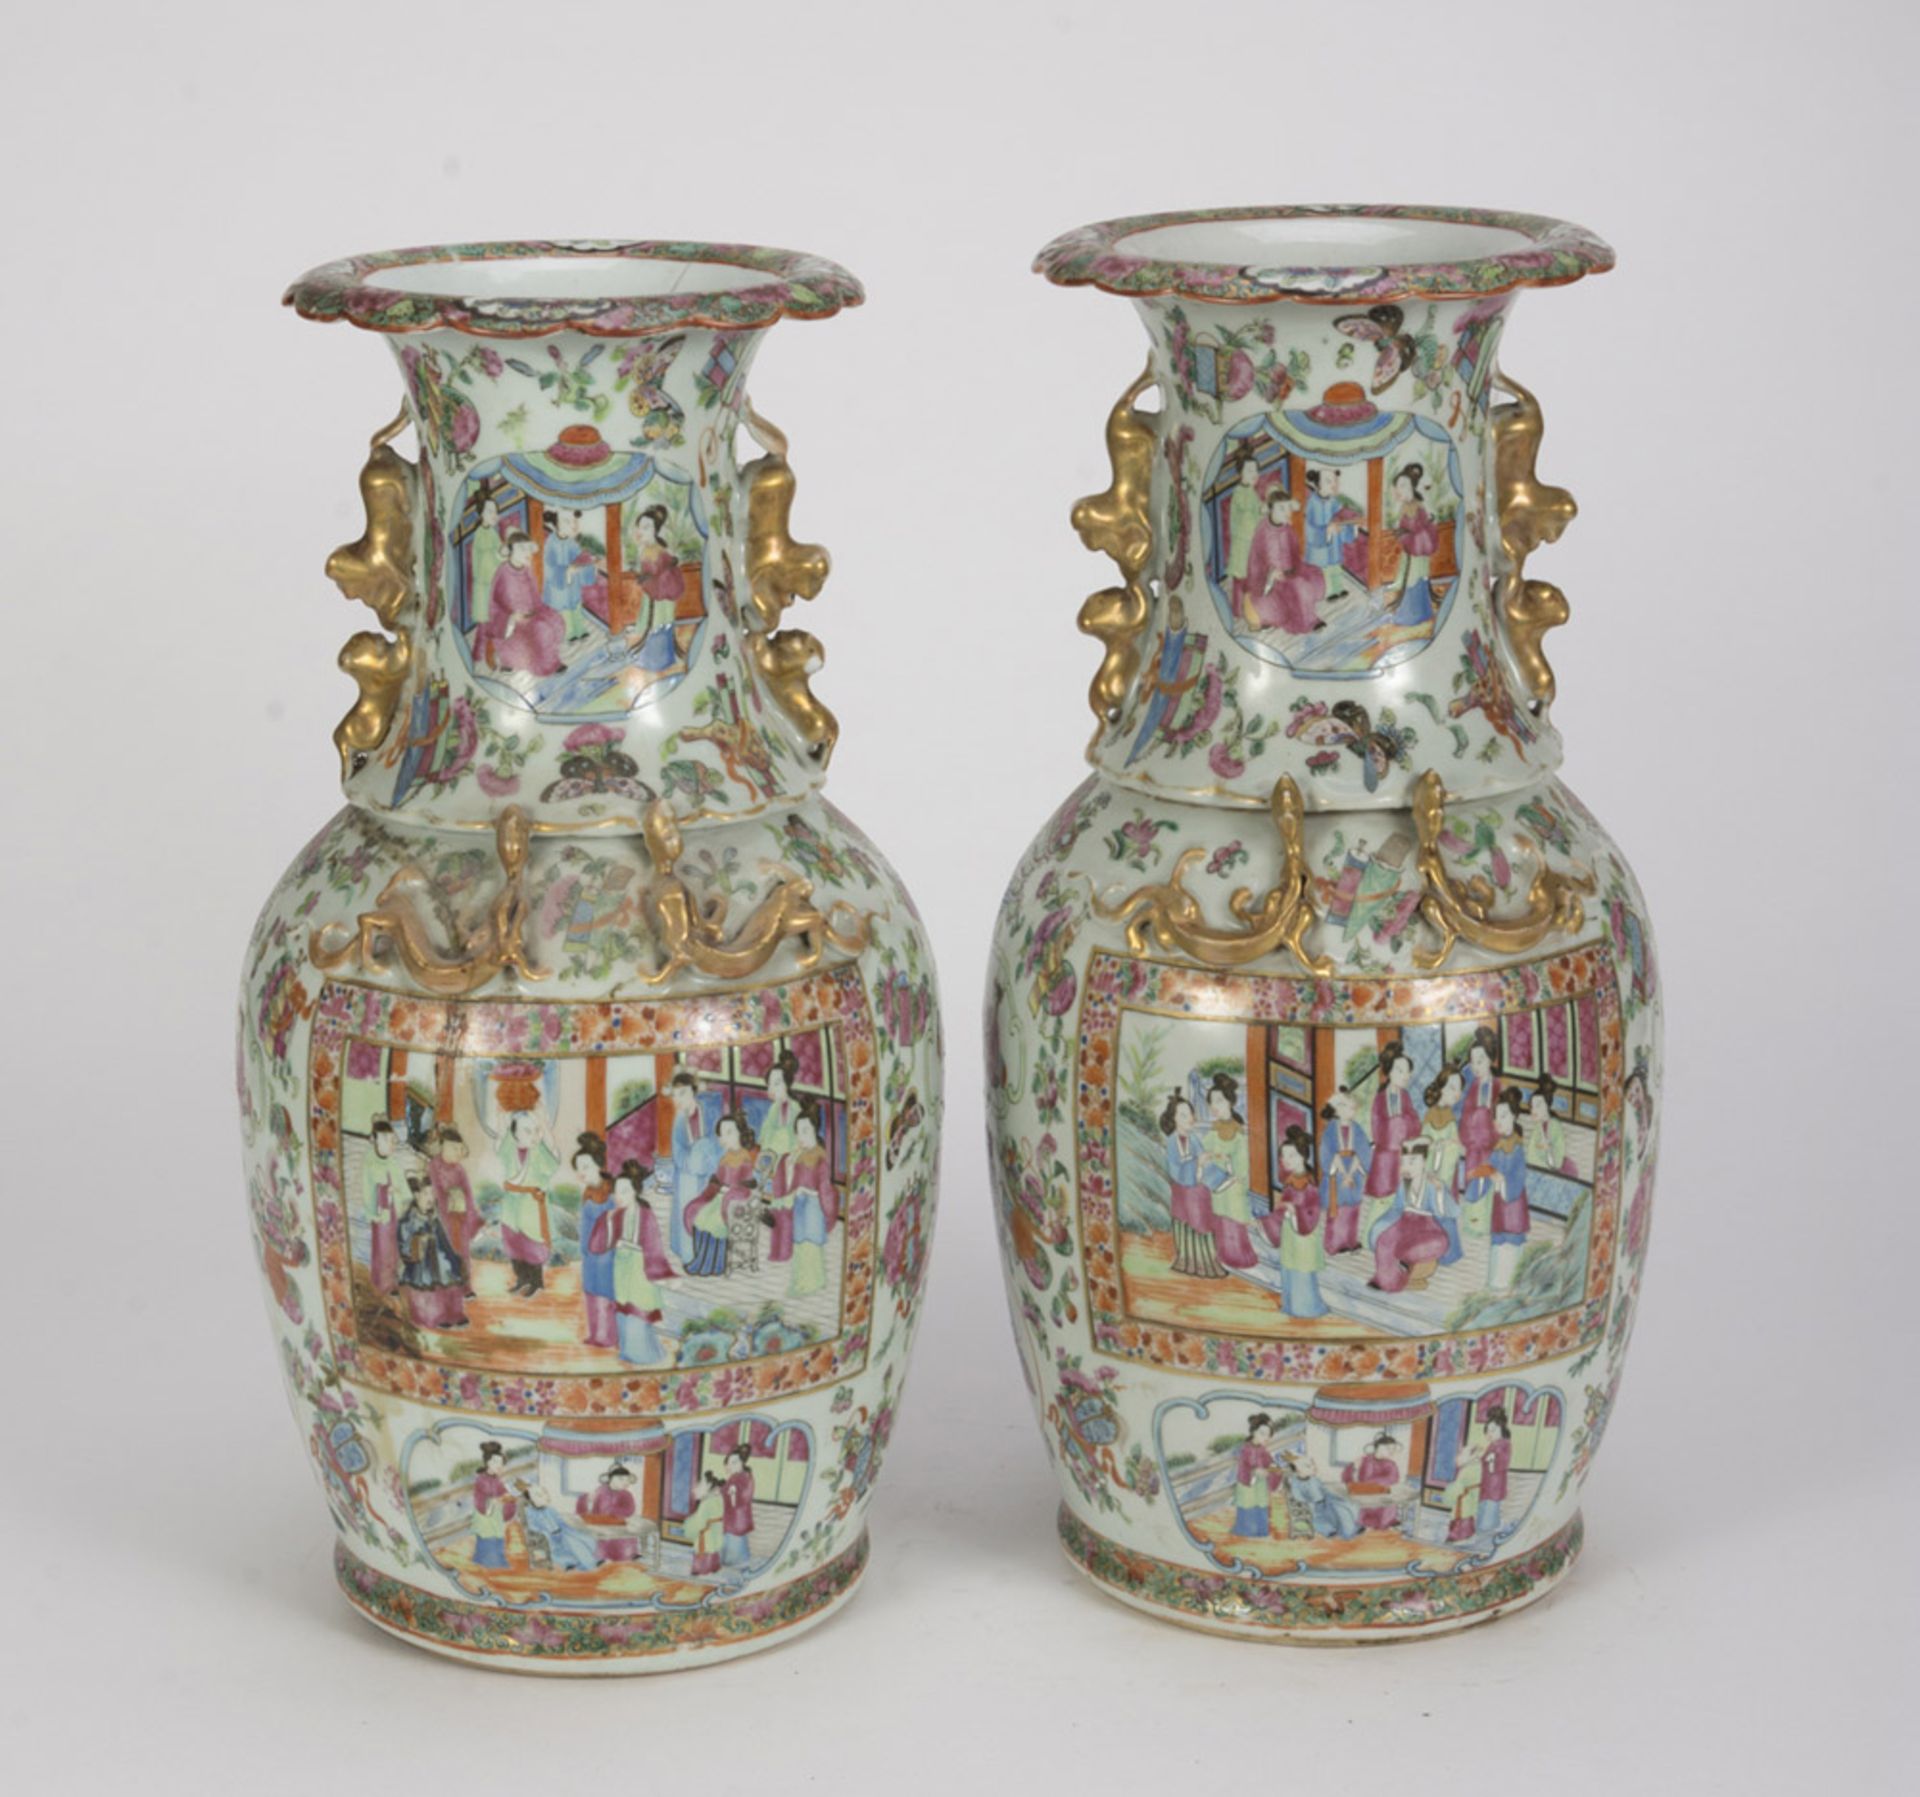 A PAIR OF POLYCHROME AND GOLD GLAZED PORCELAIN VASES, CHINA, 20TH CENTURY